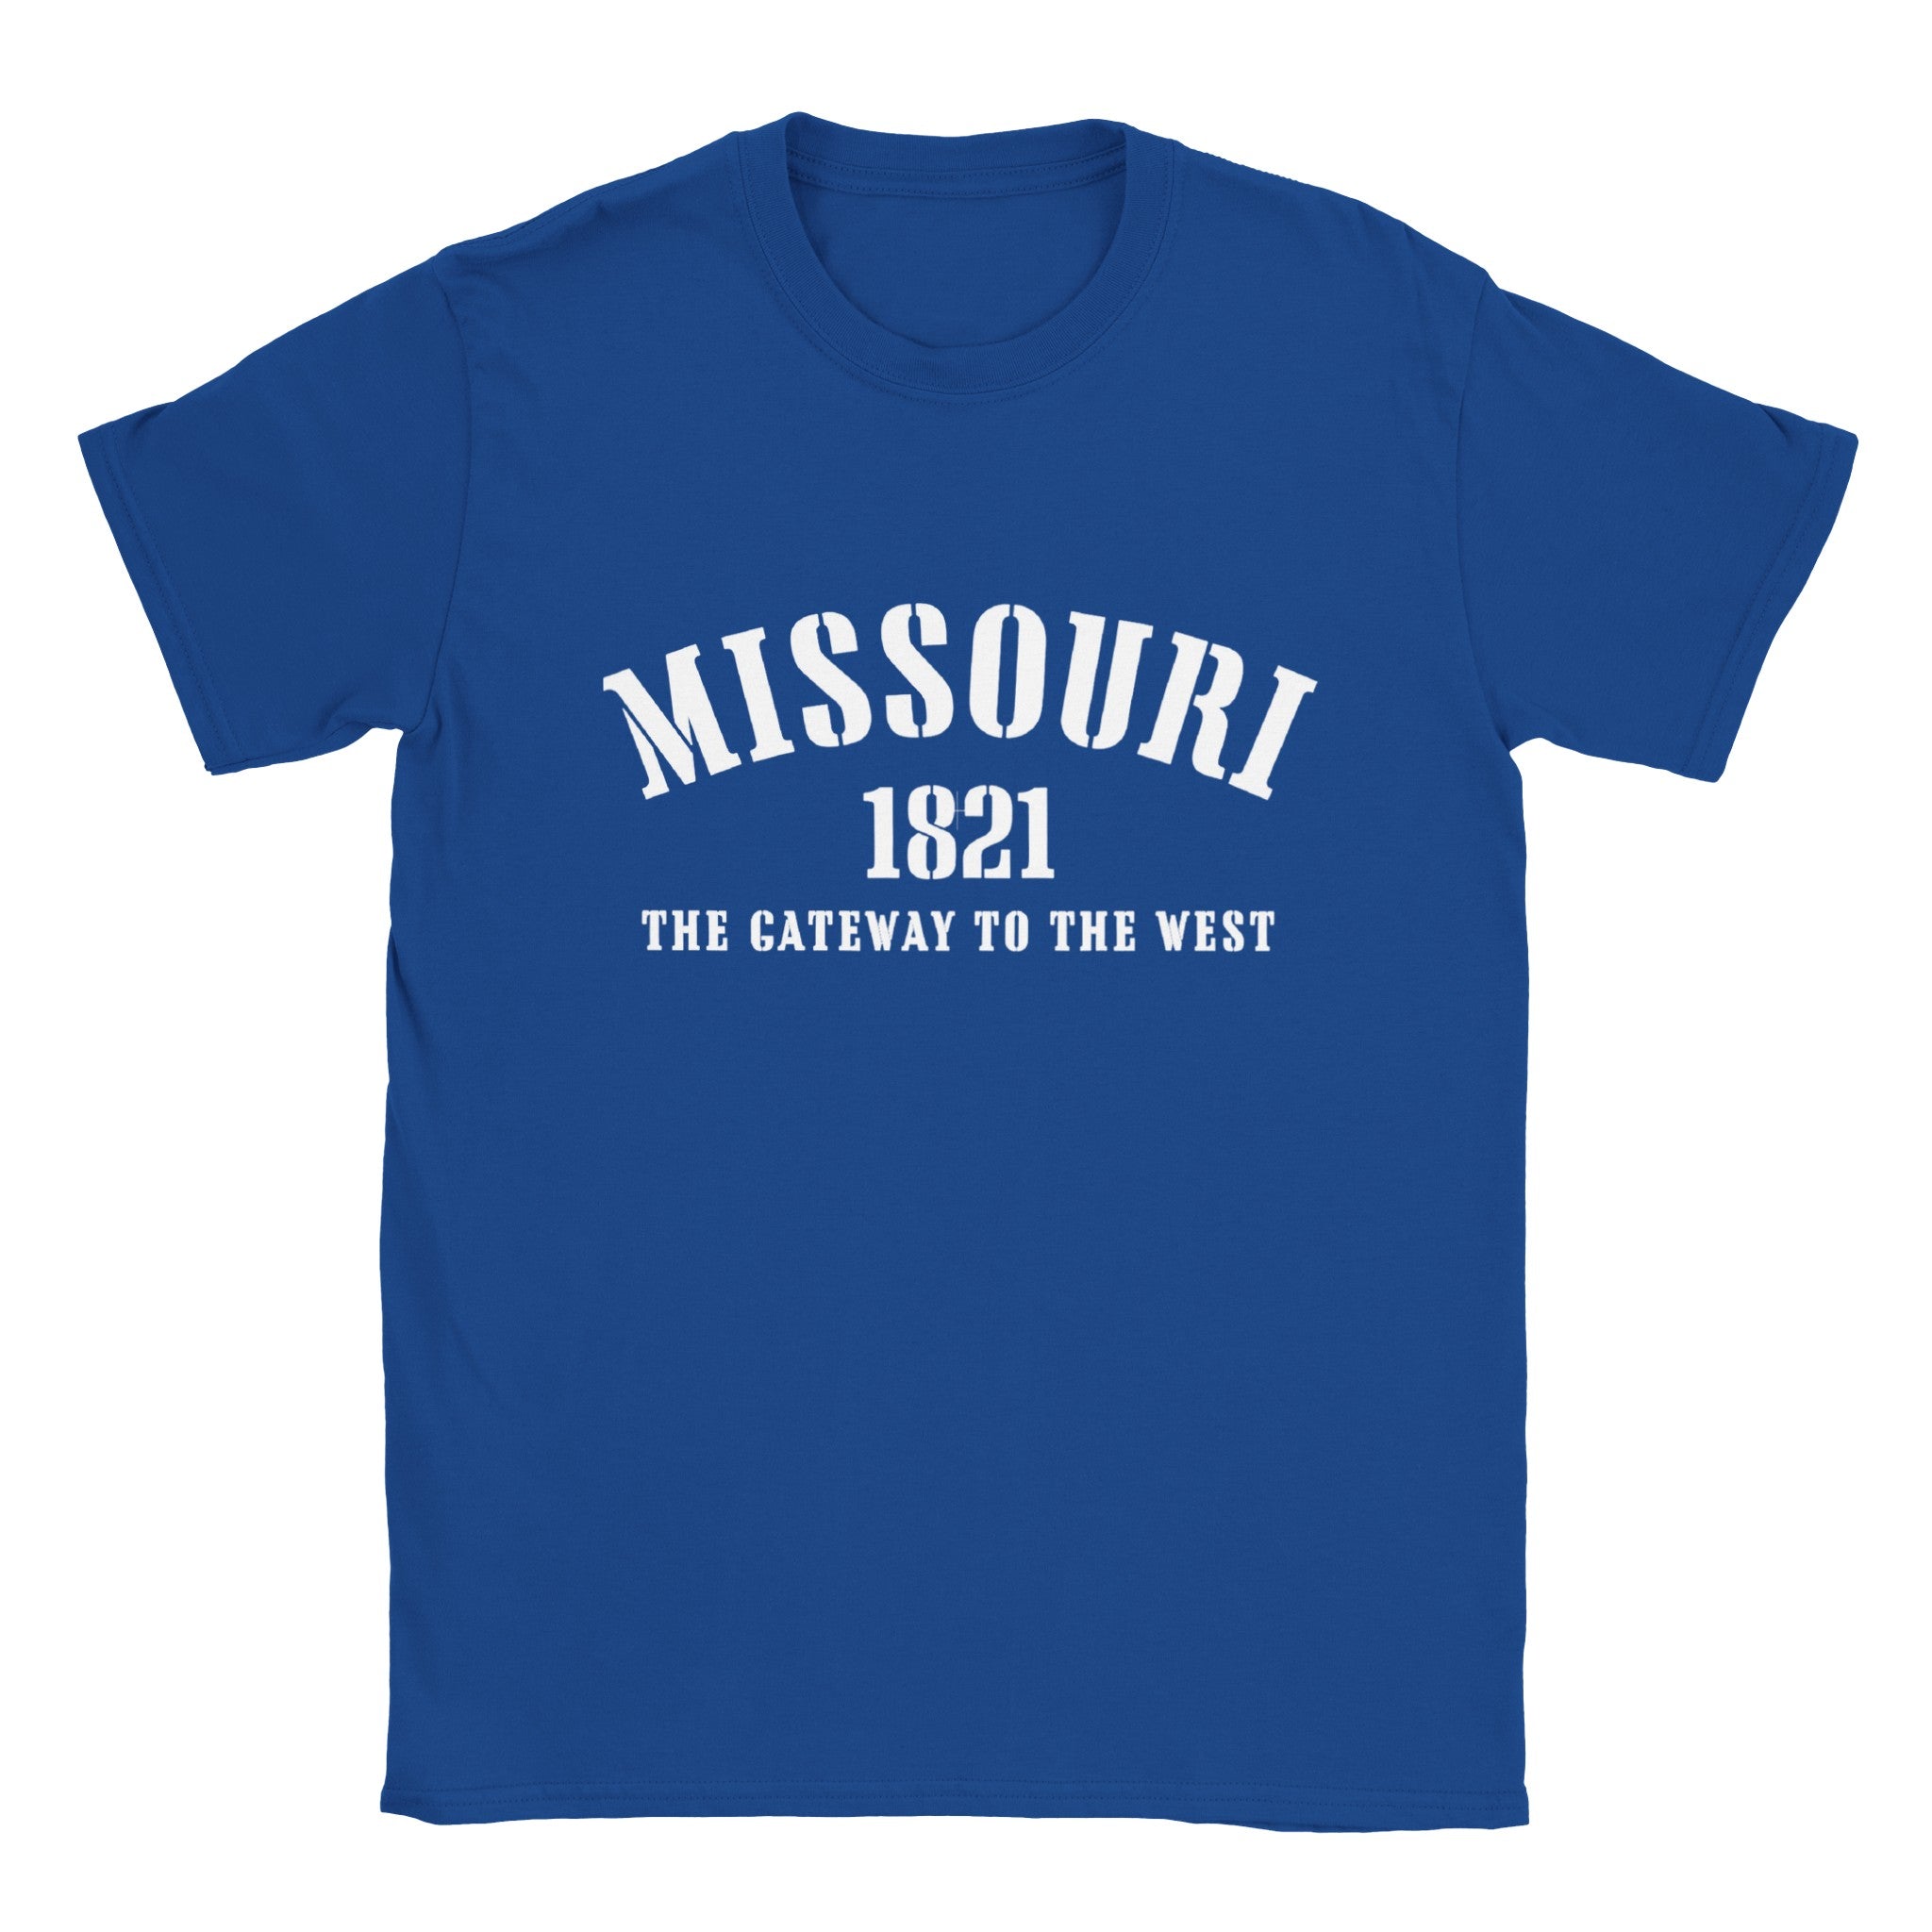 Missouri- Classic Unisex Crewneck States T-shirt - Creations by Chris and Carlos